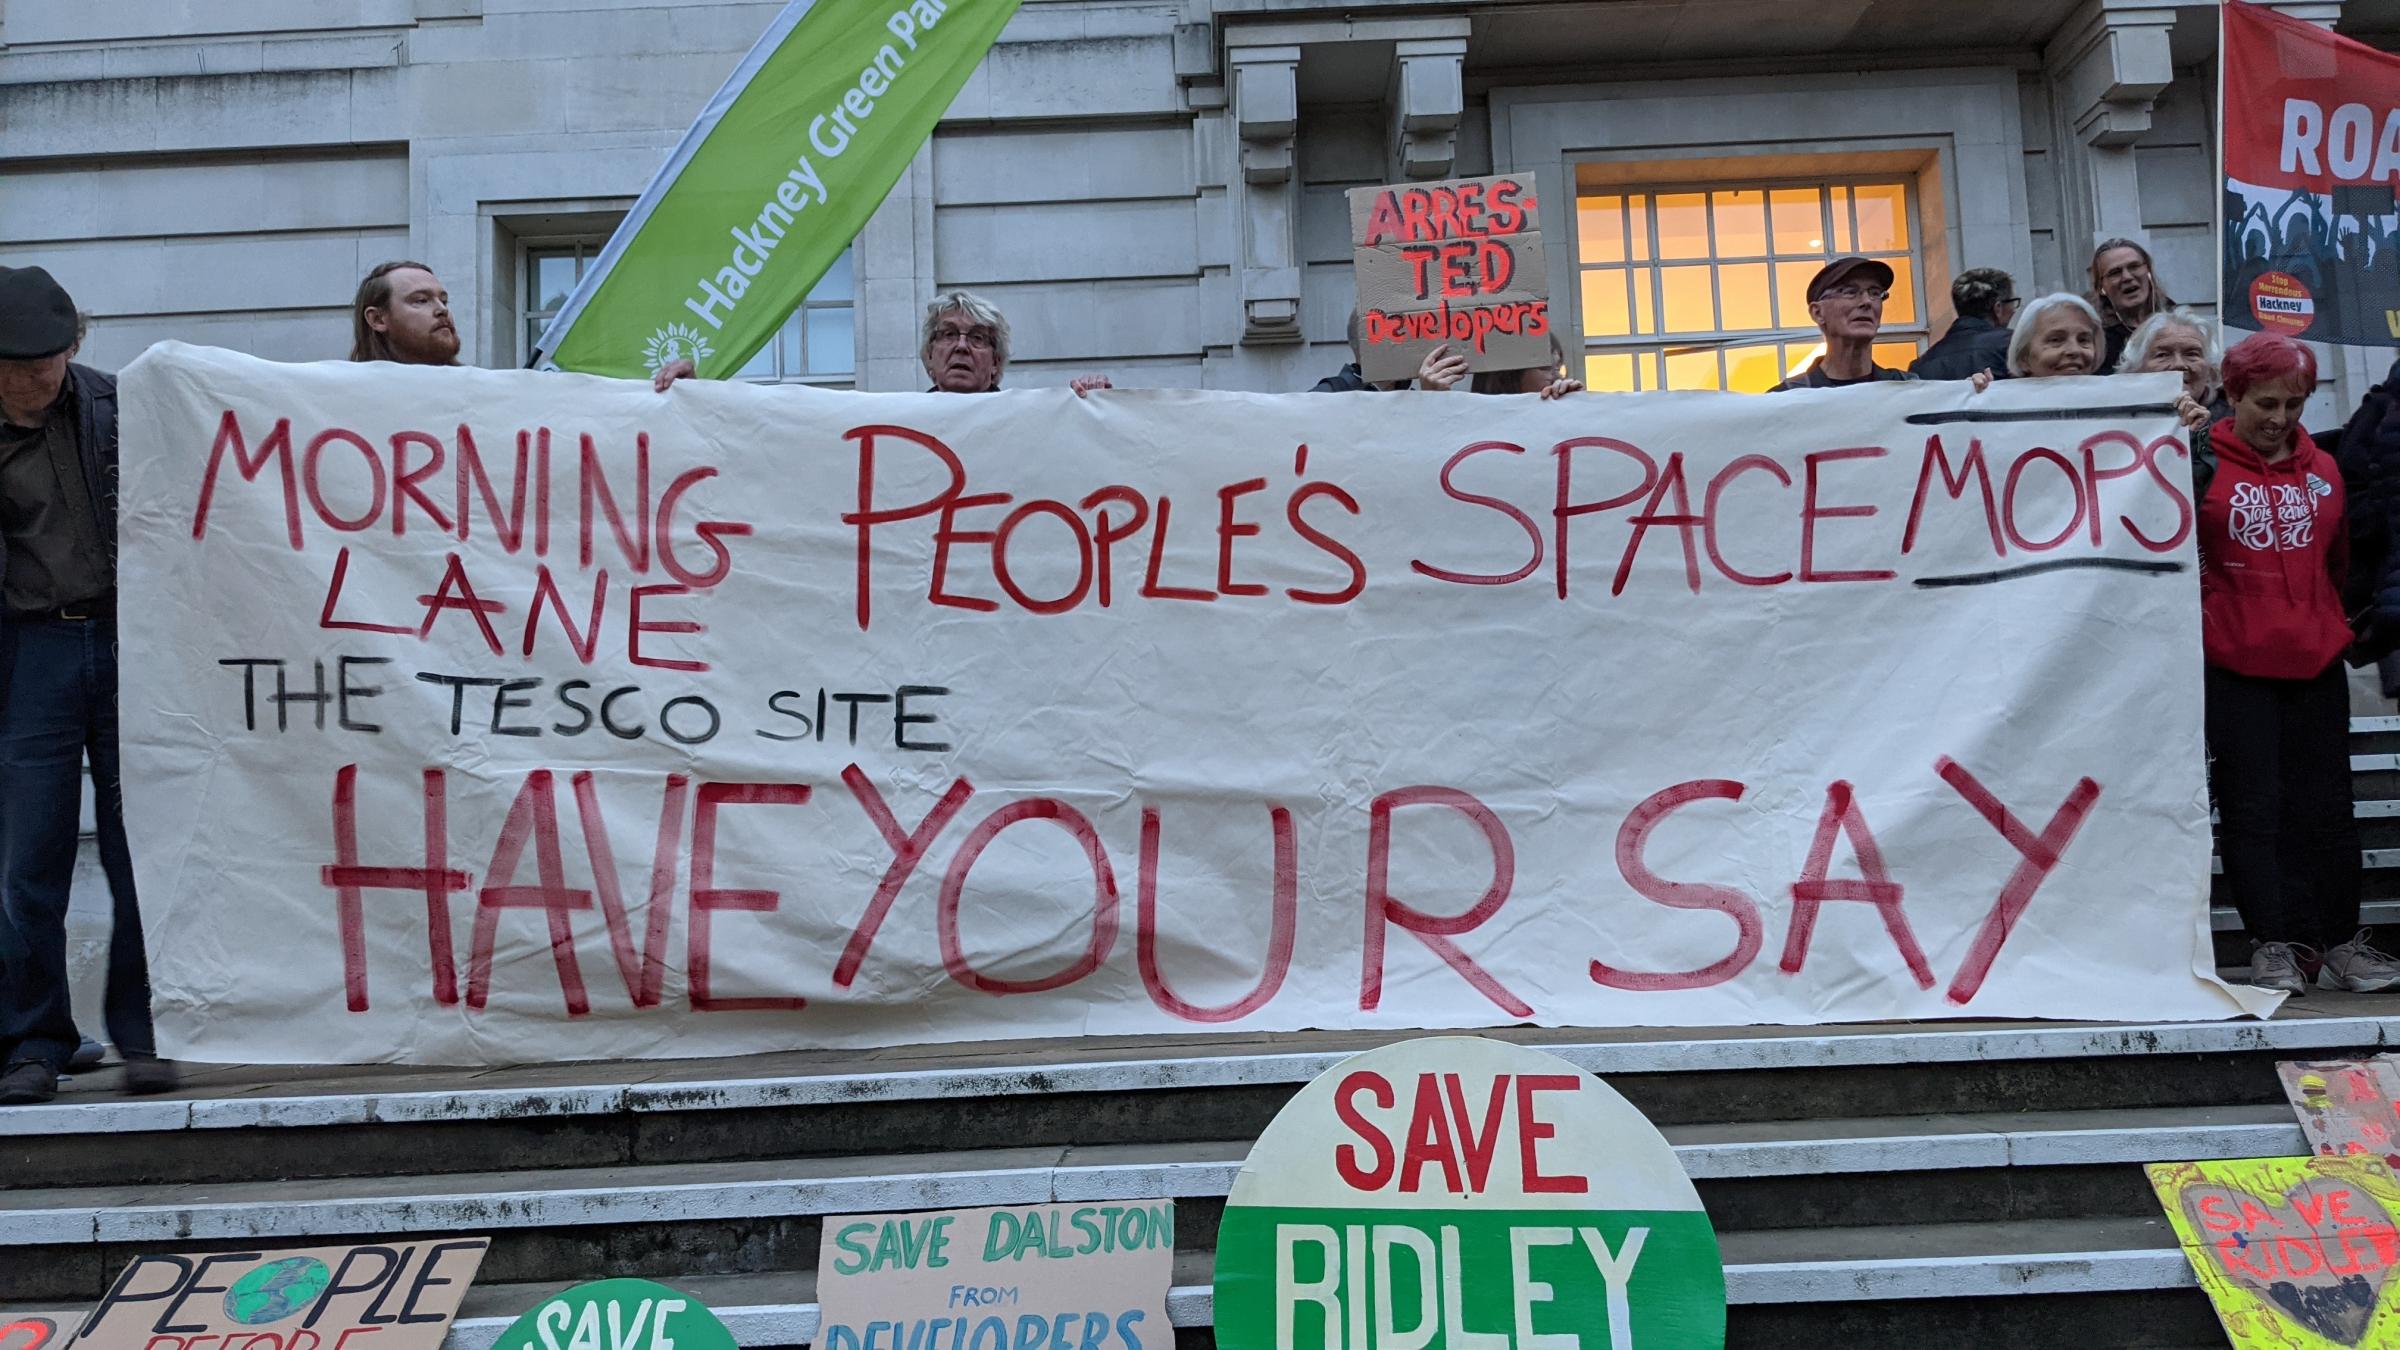 A protest over the Morning Lane development outside Hackney town hall. Photo: Morning Lane Peoples Space